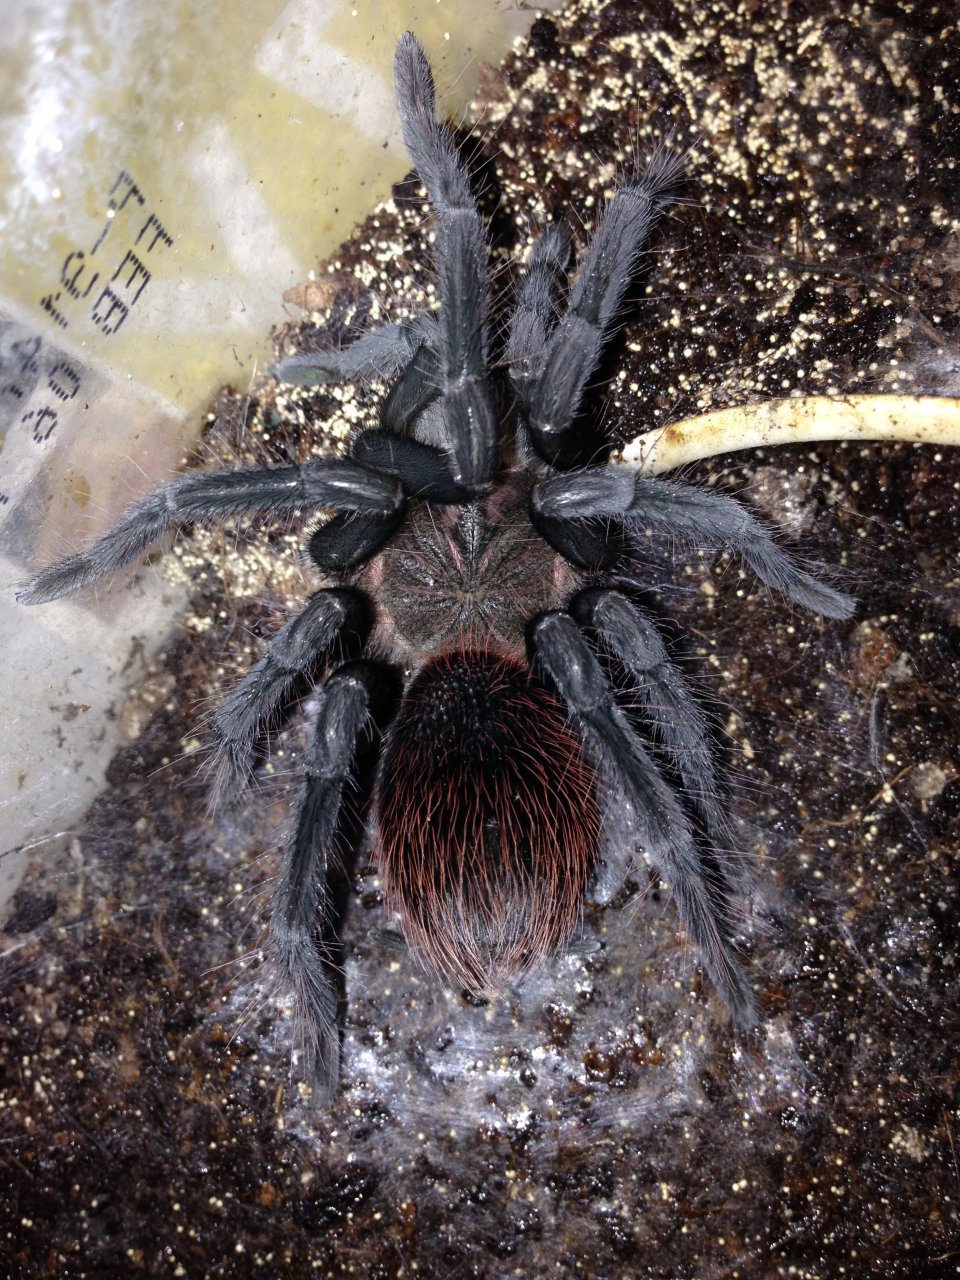 0.1 X. immanis Freshly Molted (Not a male)